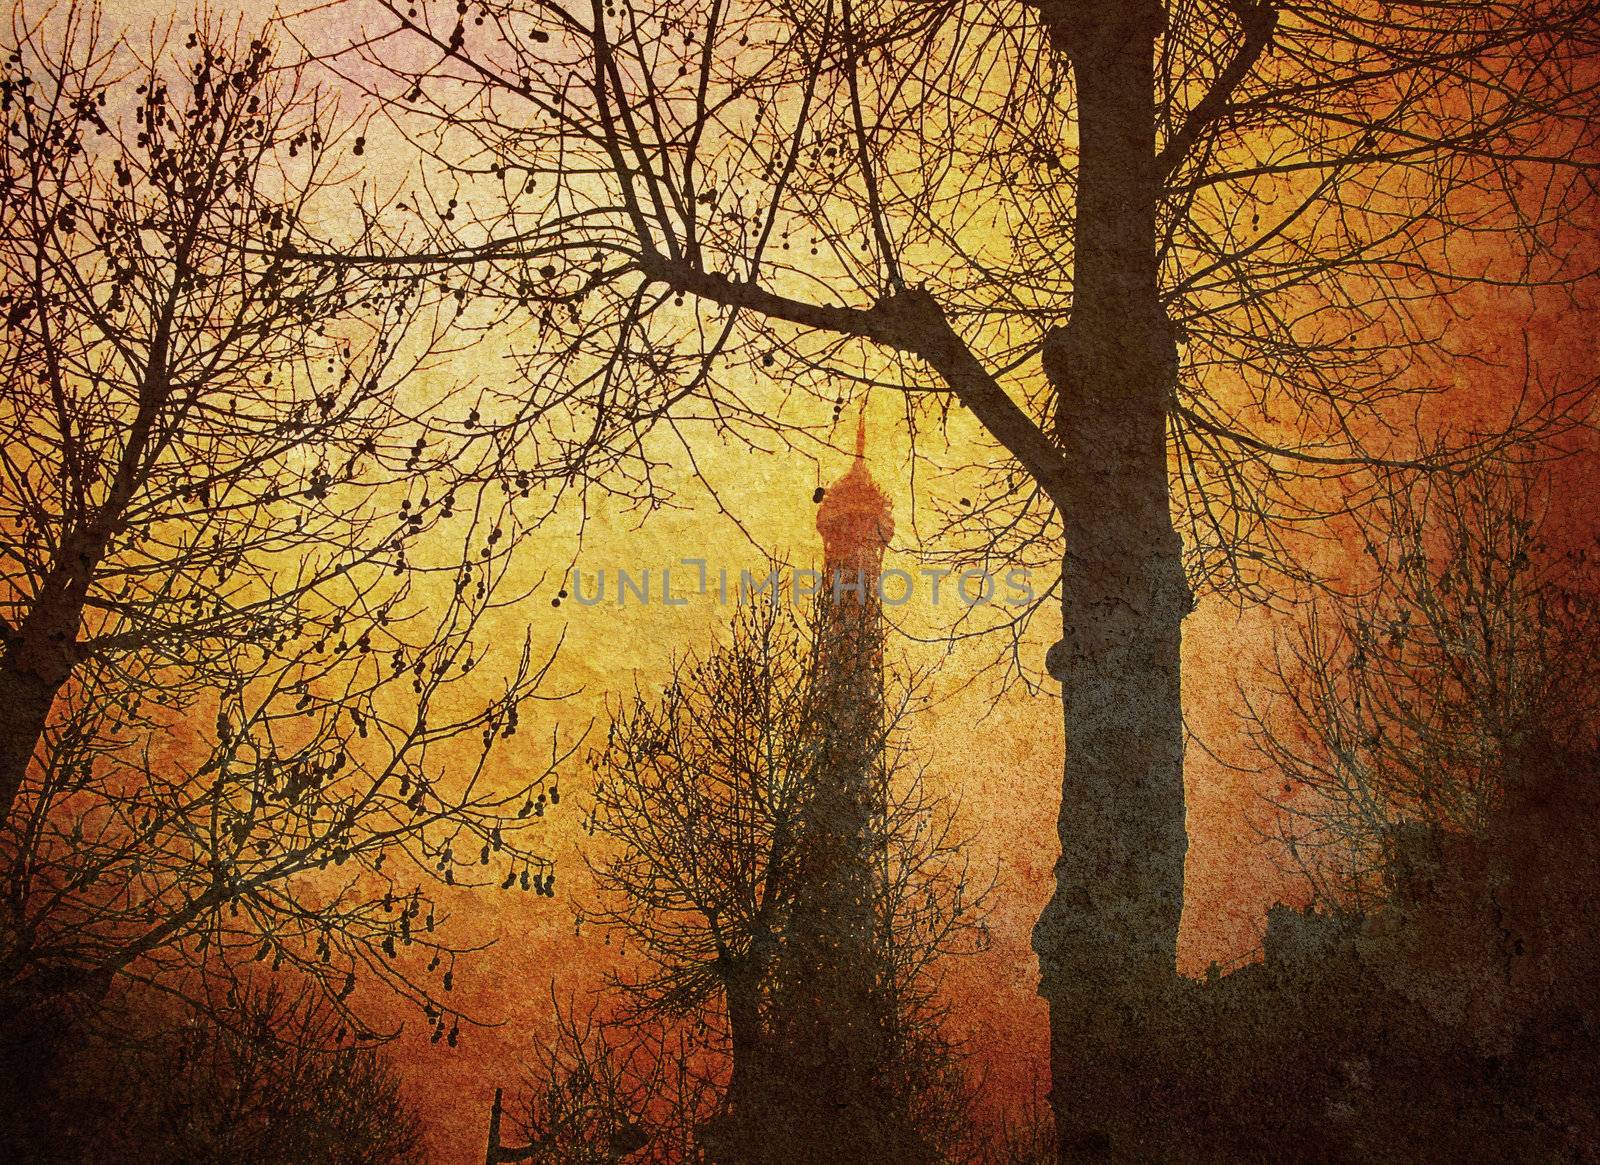 More of my photos worked together to give a retro an unreal impression. Paris early winter morning.